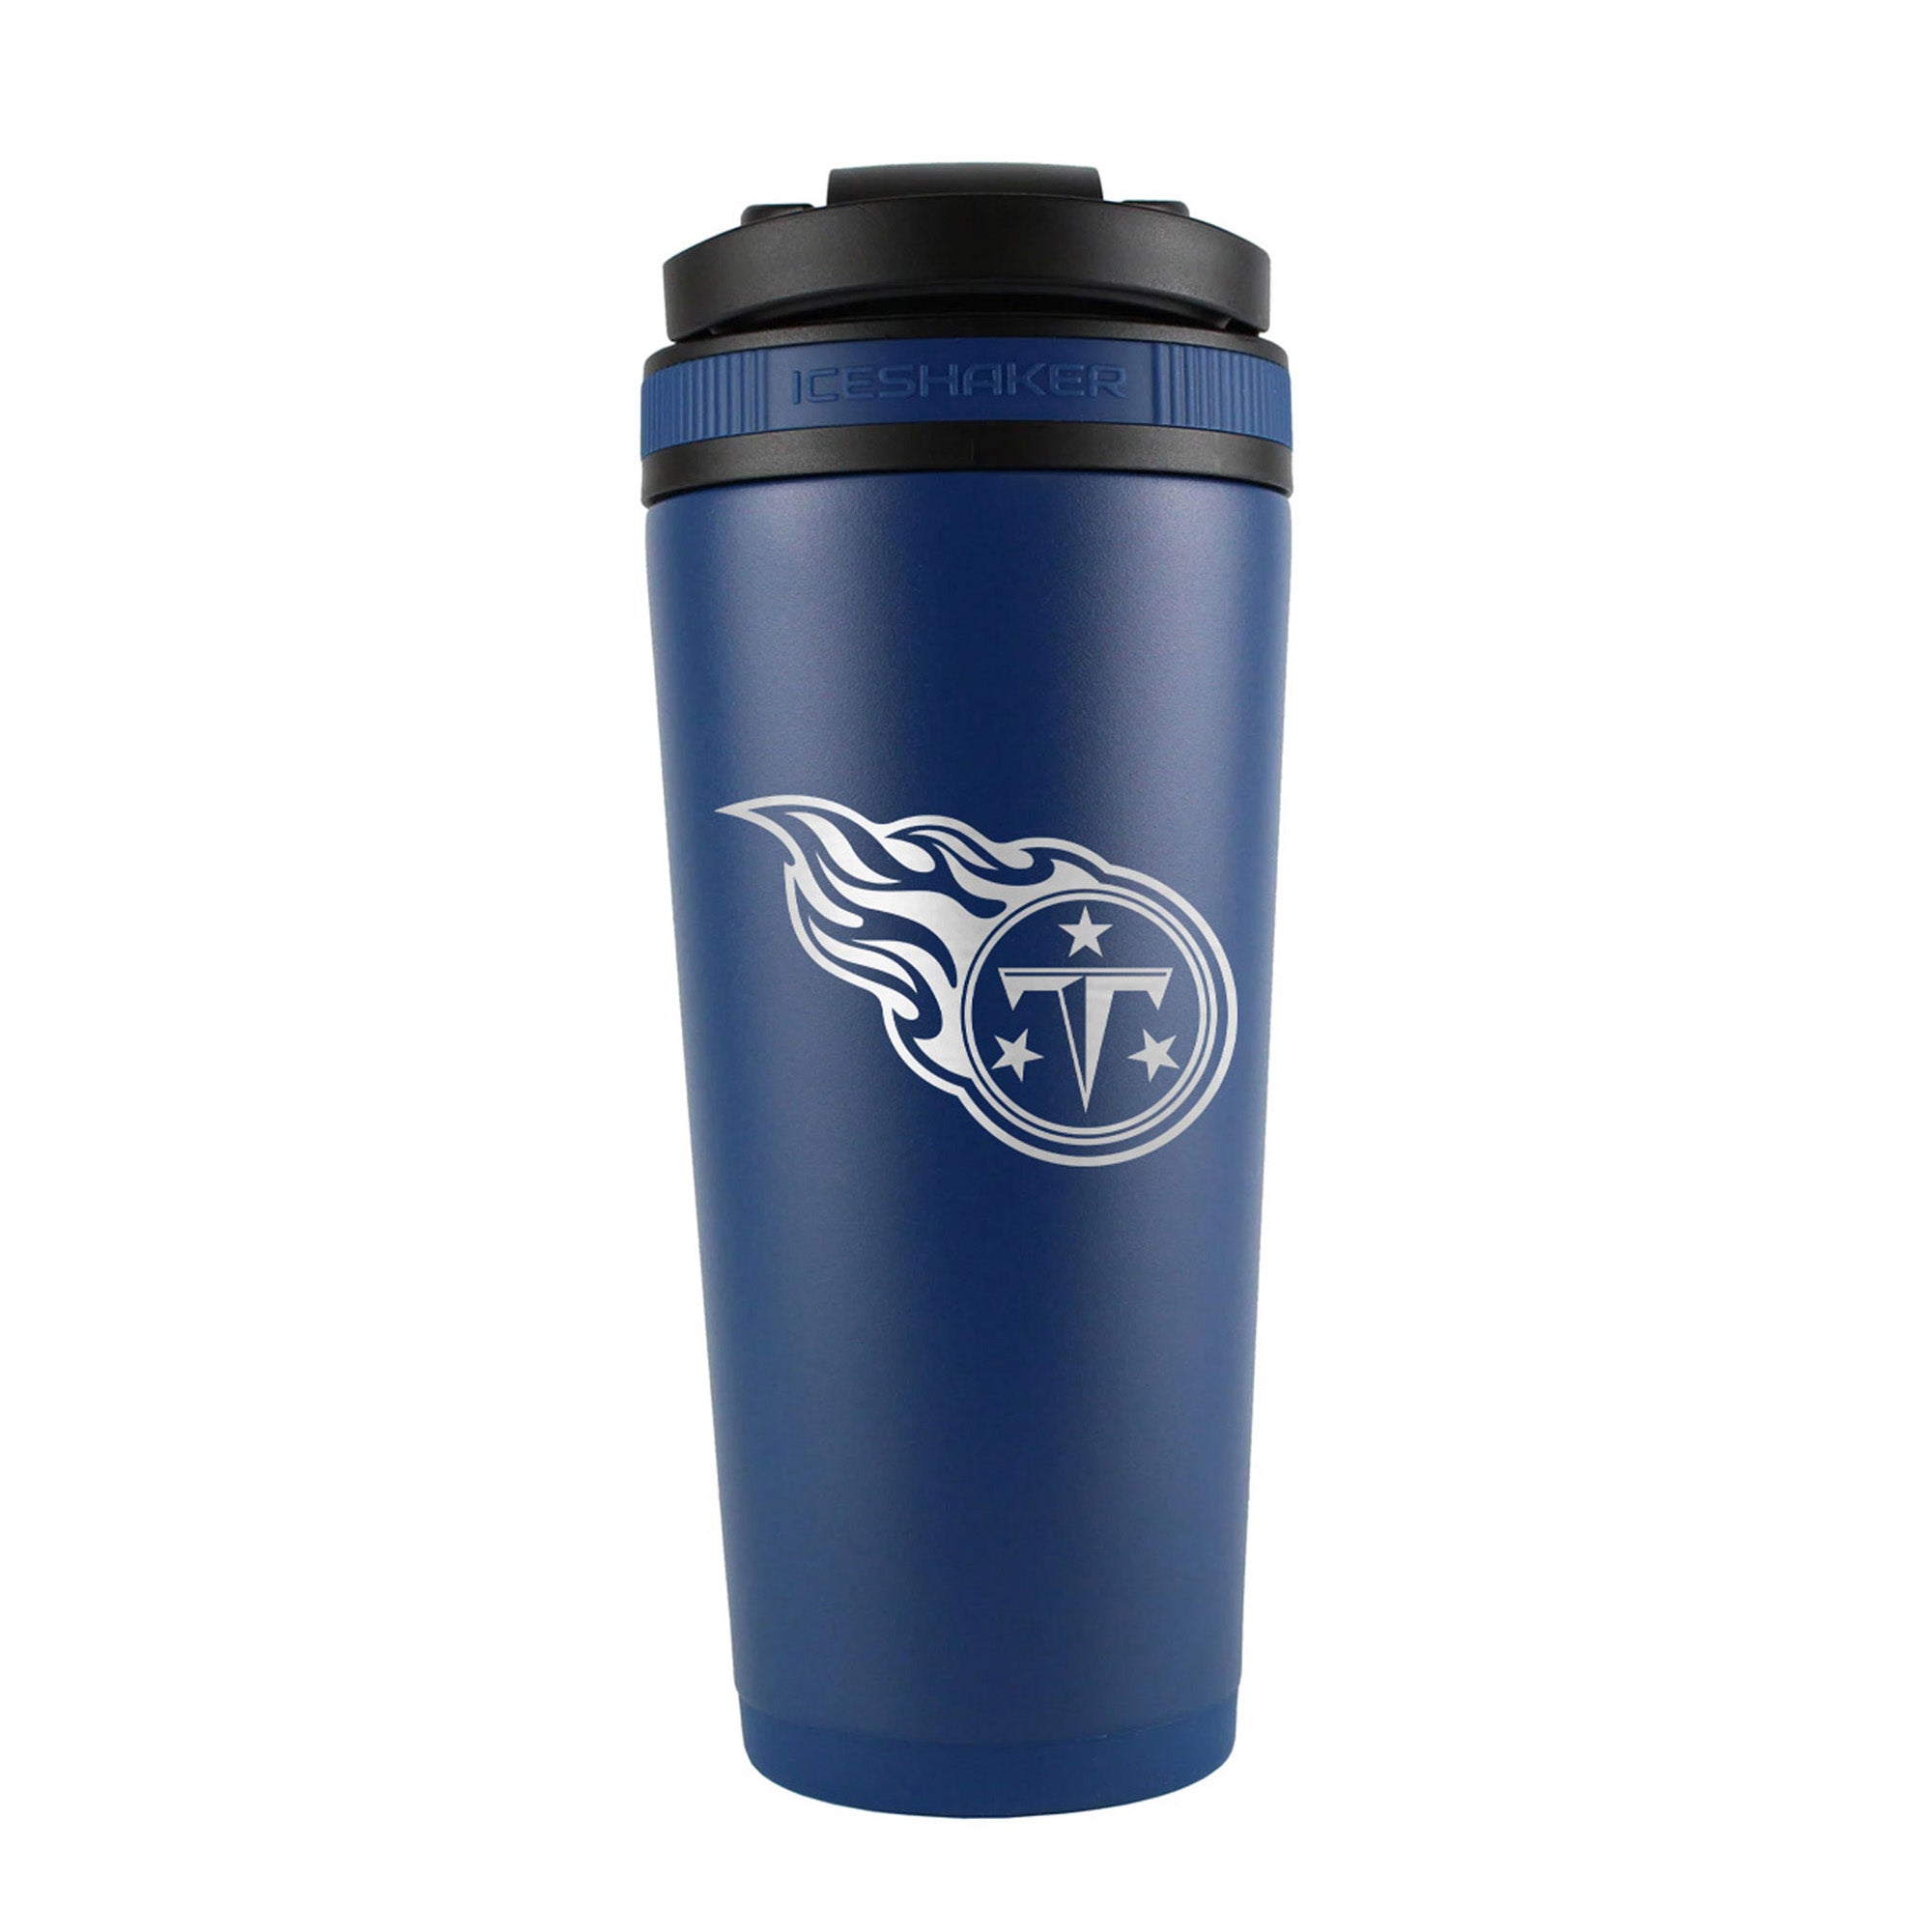 Officially Licensed Tennessee Titans 26oz Ice Shaker - Navy